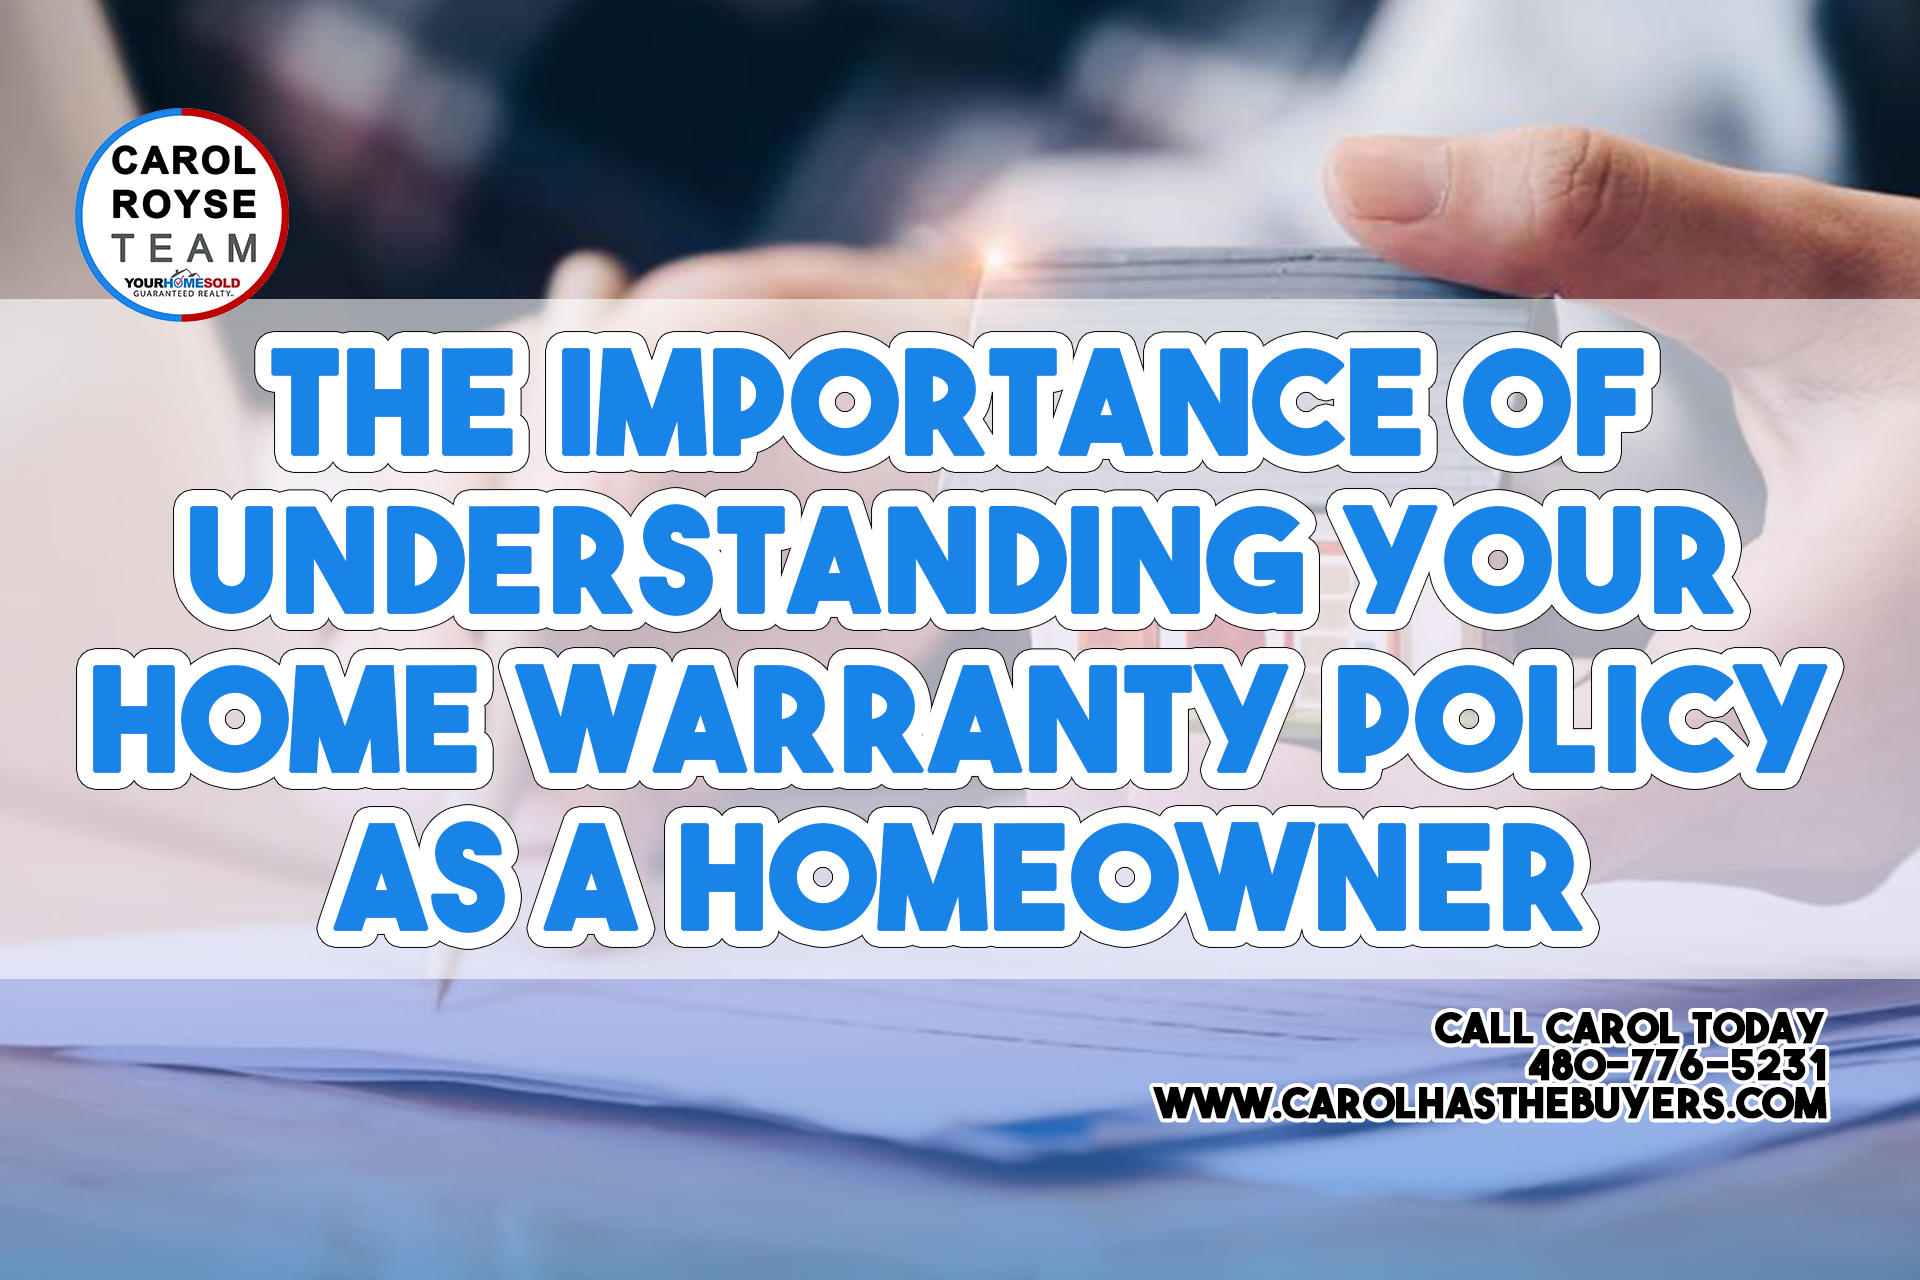 The Importance of Understanding Your Home Warranty Policy as a Homeowner